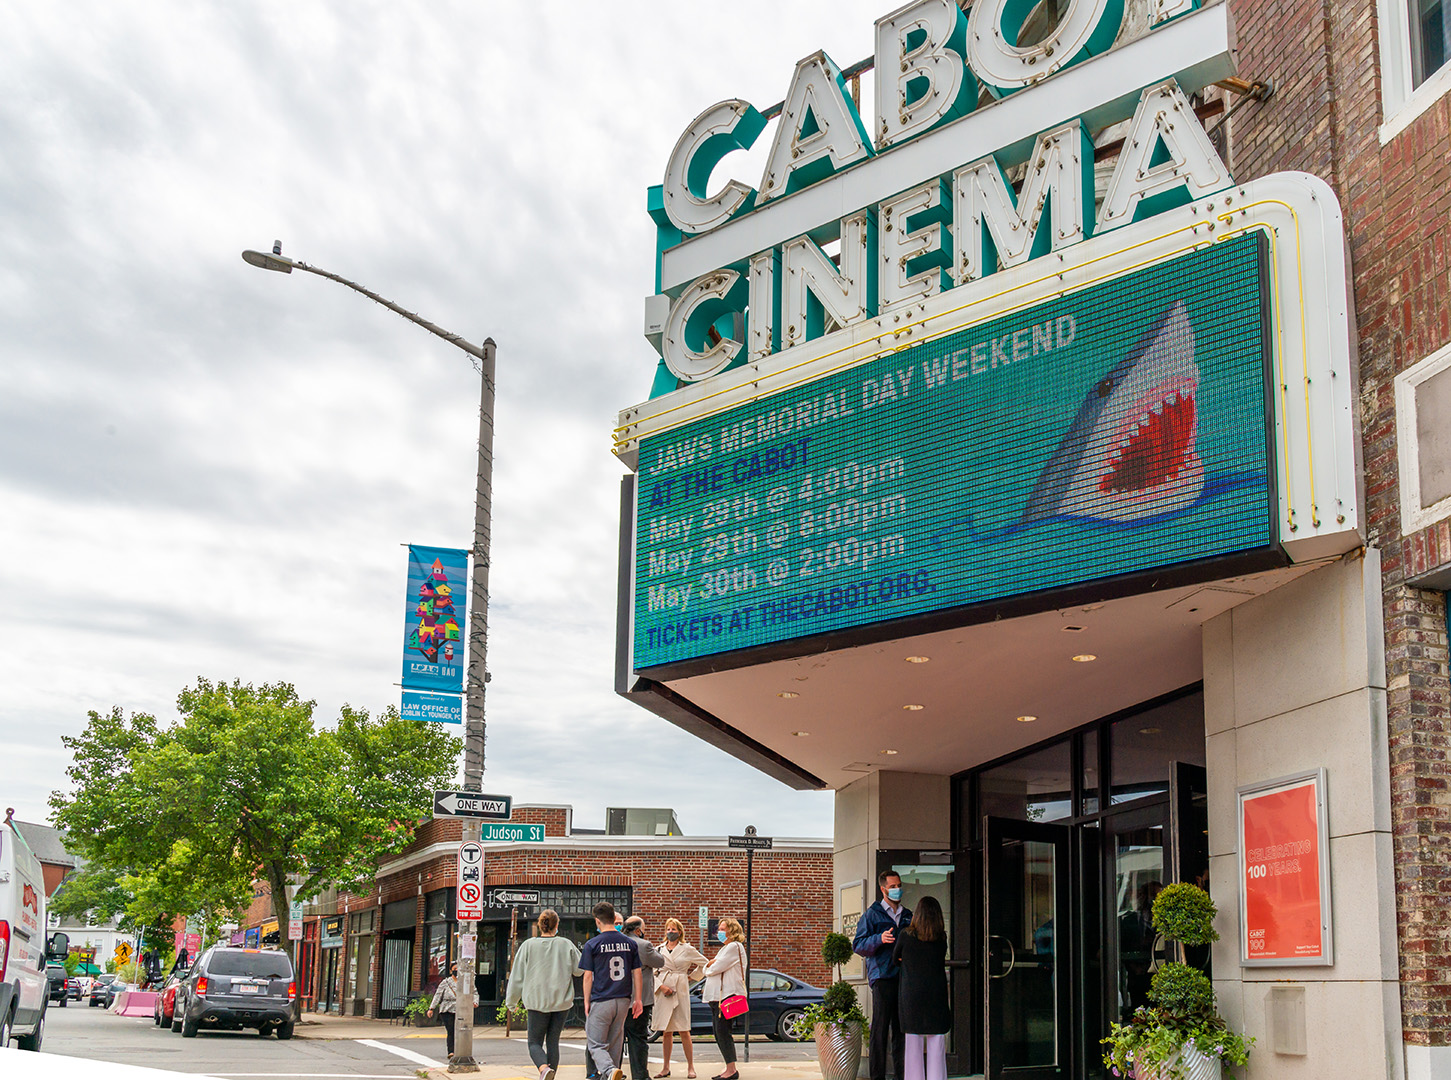 A photograph of the outside of The Cabot cinema, showing Jaws.